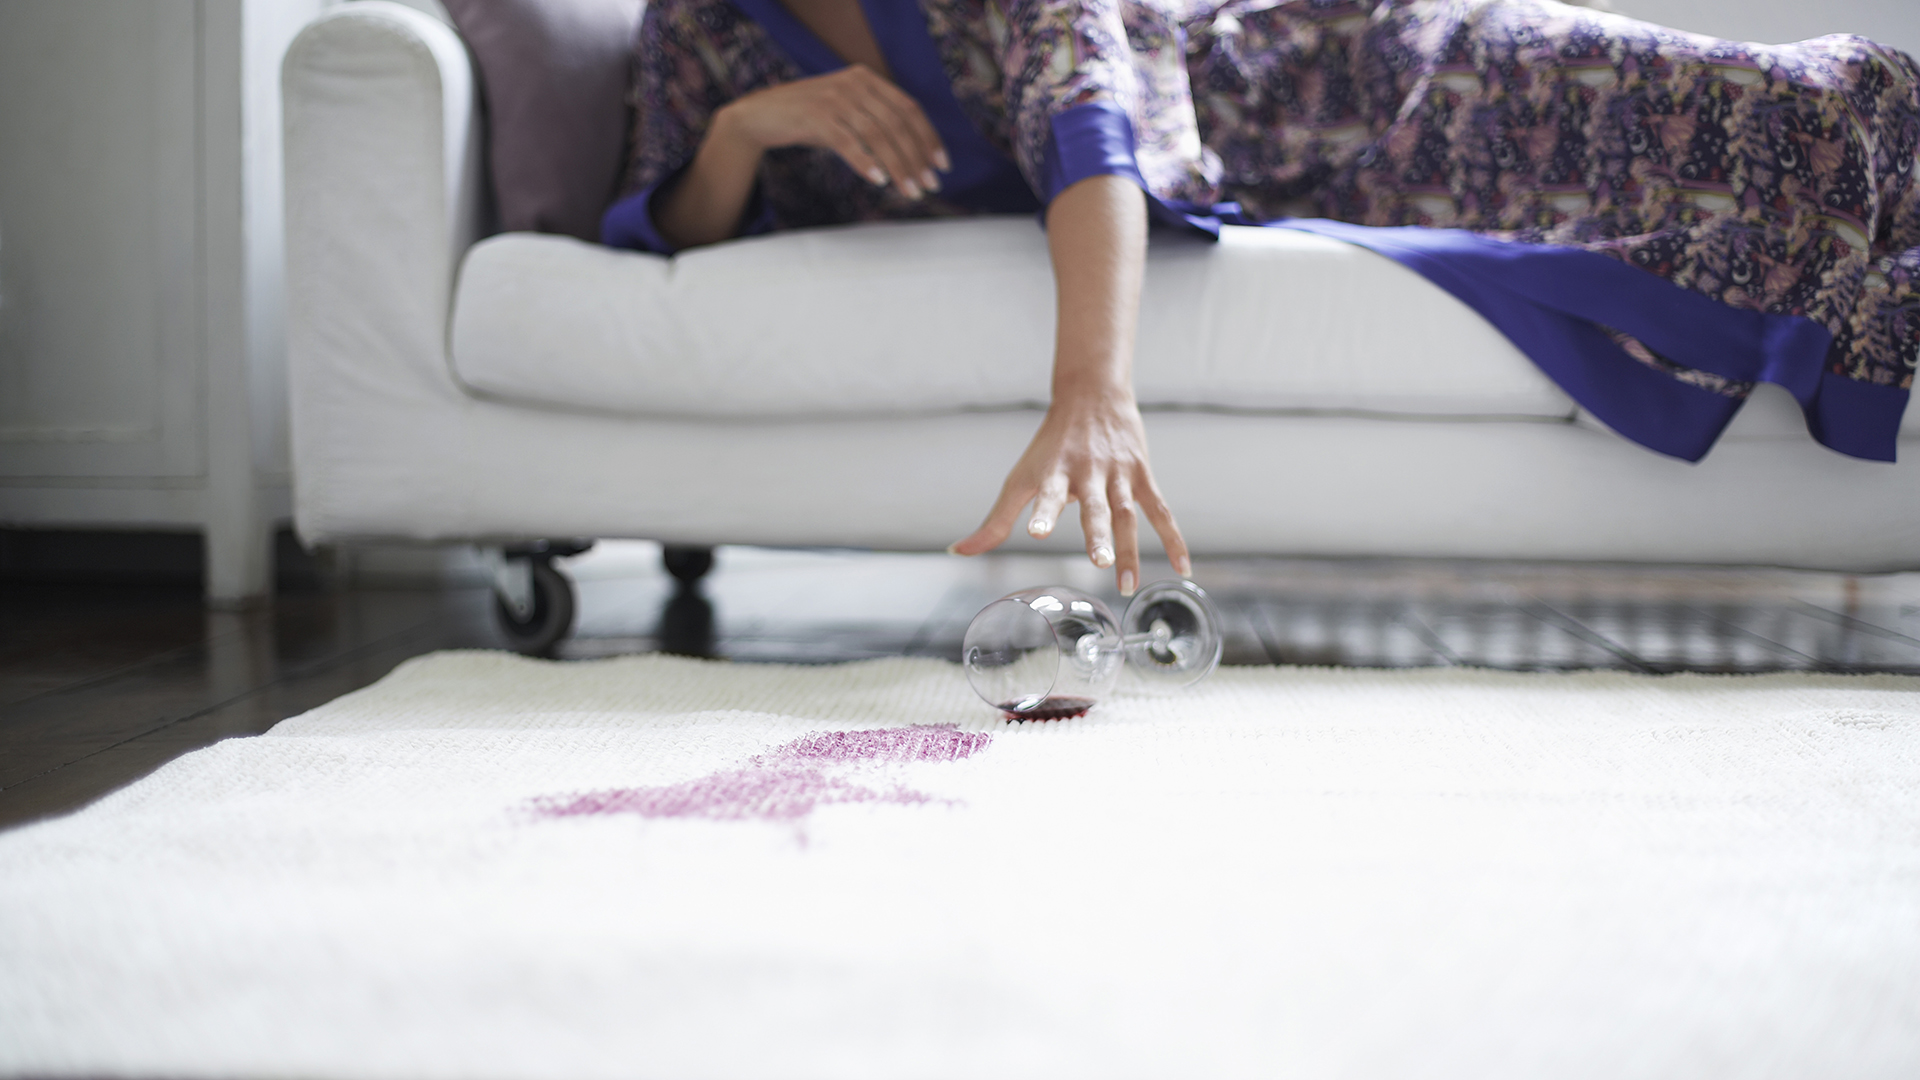 How to remove wine stains from carpet